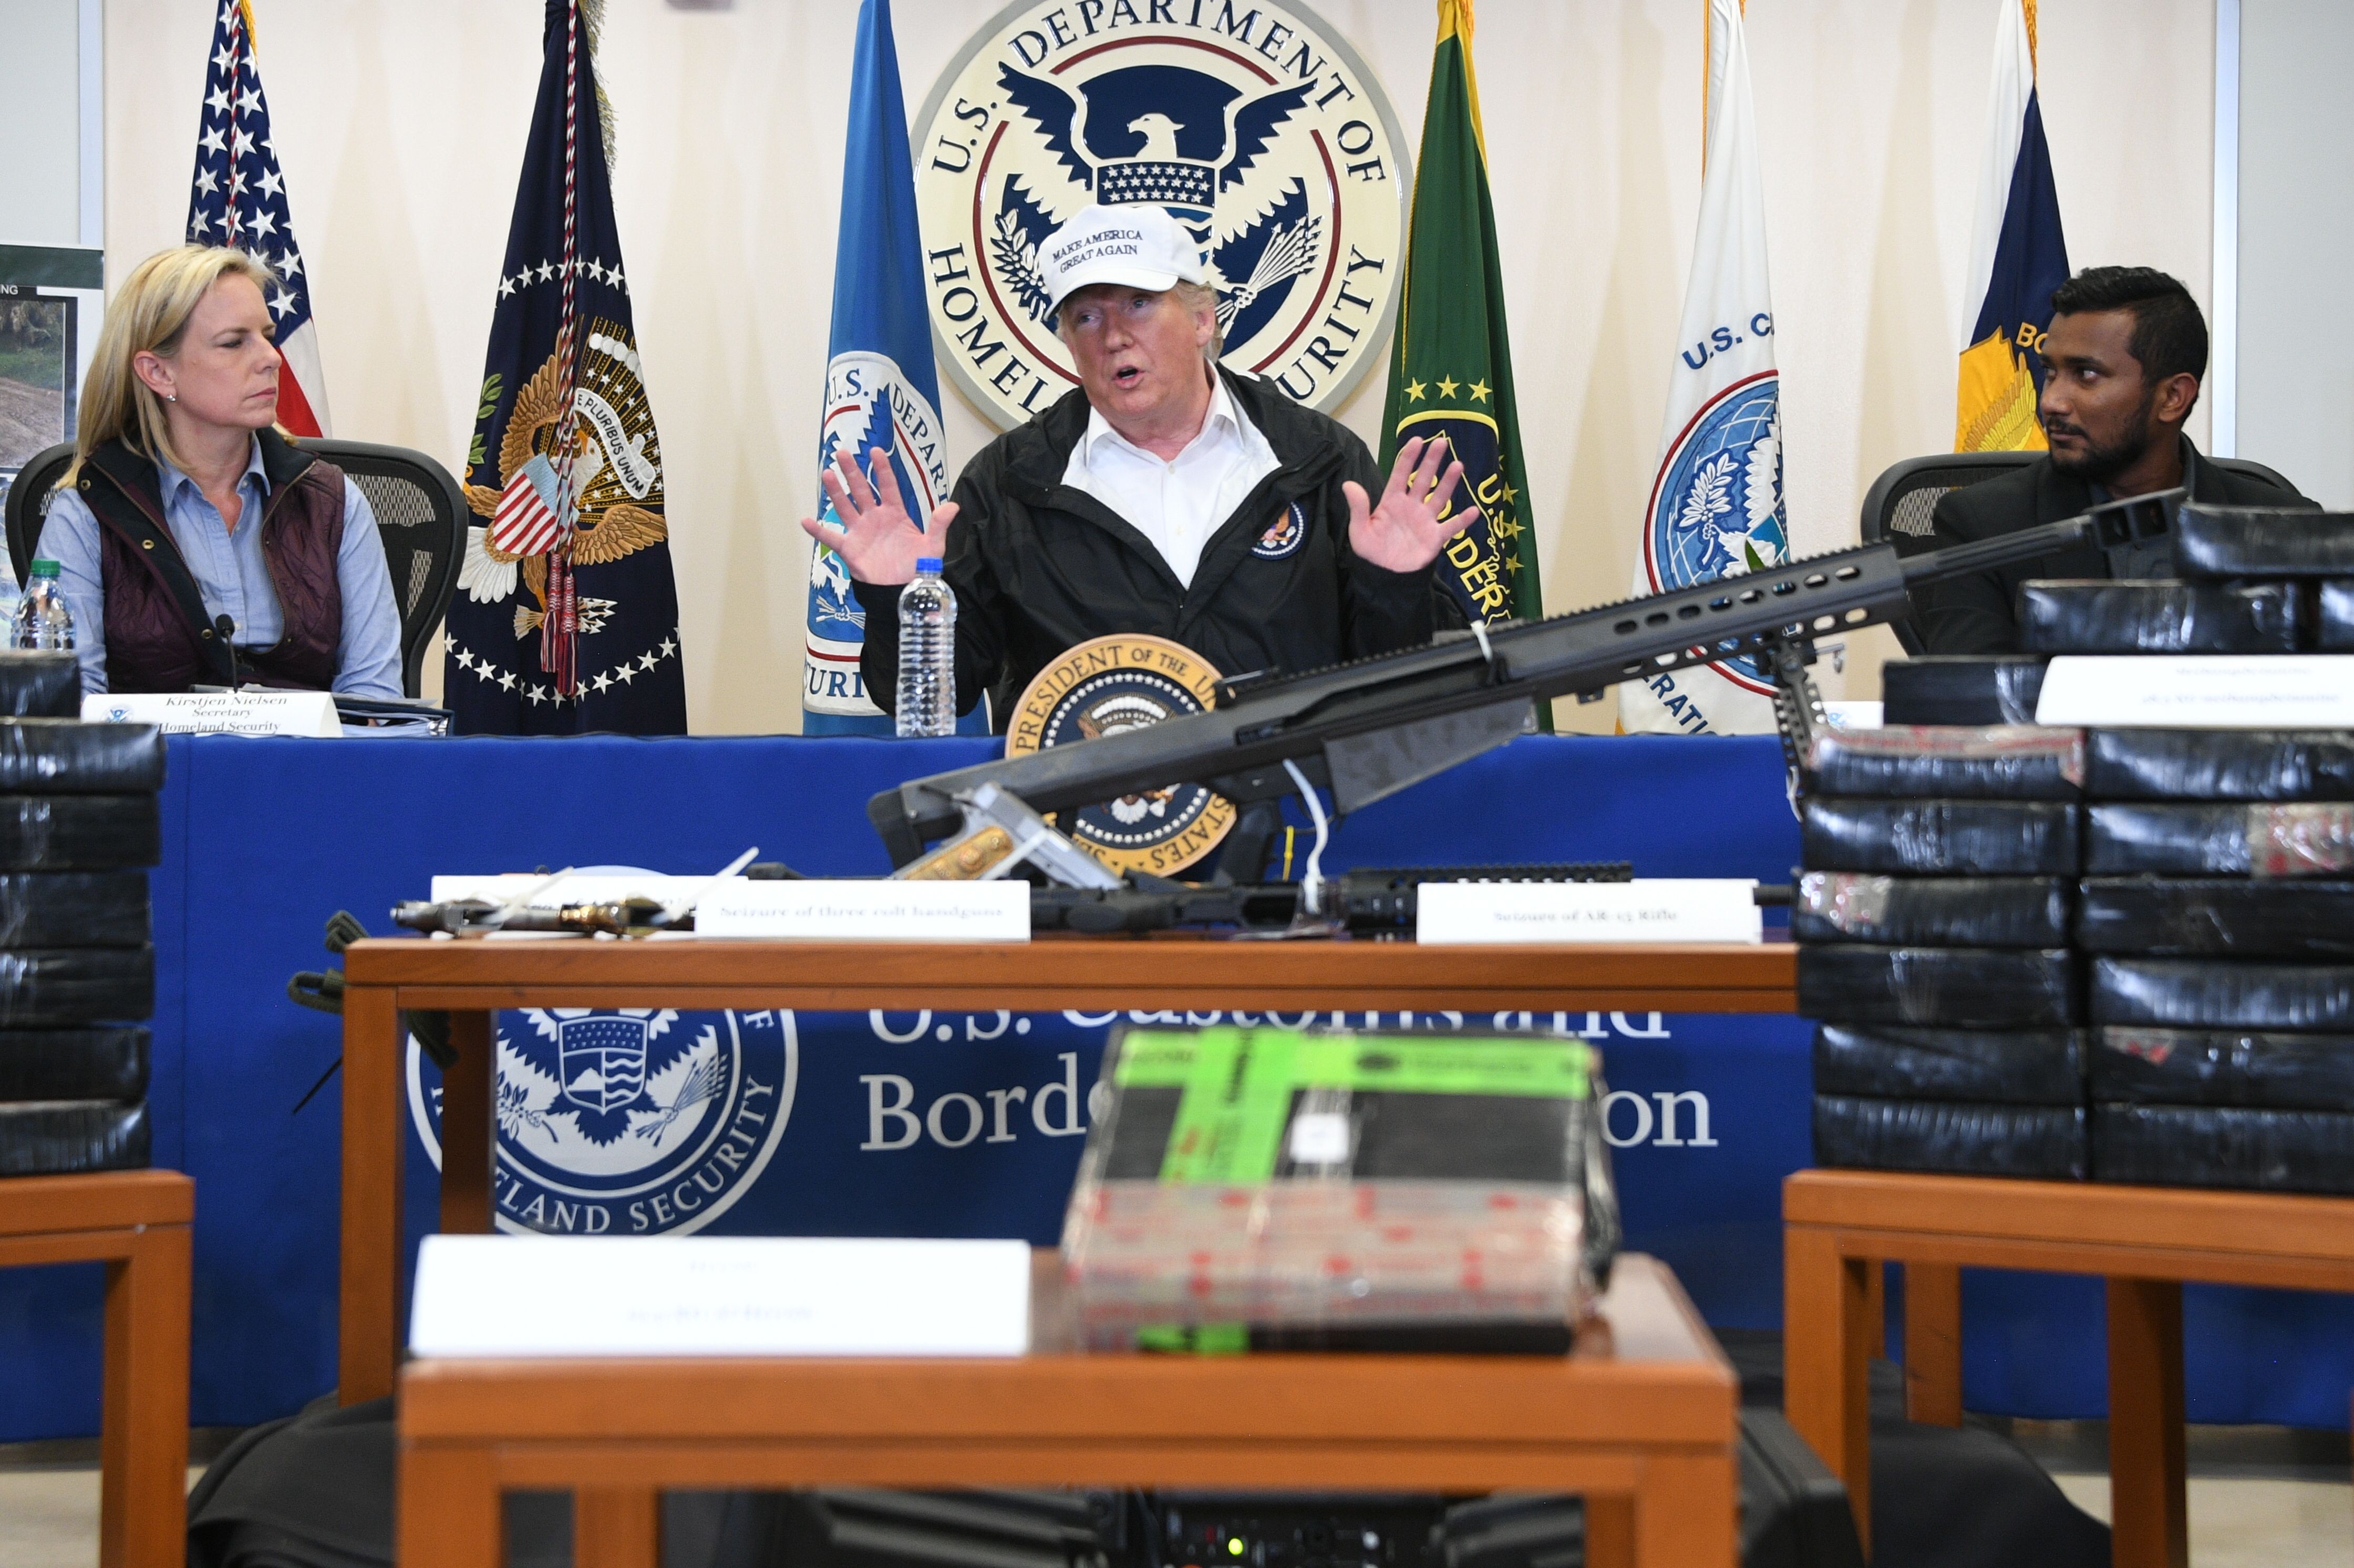 US President Donald Trump (C), with Homeland Security Secretary Kirstjen Nielsen (L), speaks during his visit to US Border Patrol McAllen Station in McAllen, Texas, on January 10, 2019. (JIM WATSON/AFP/Getty Images)